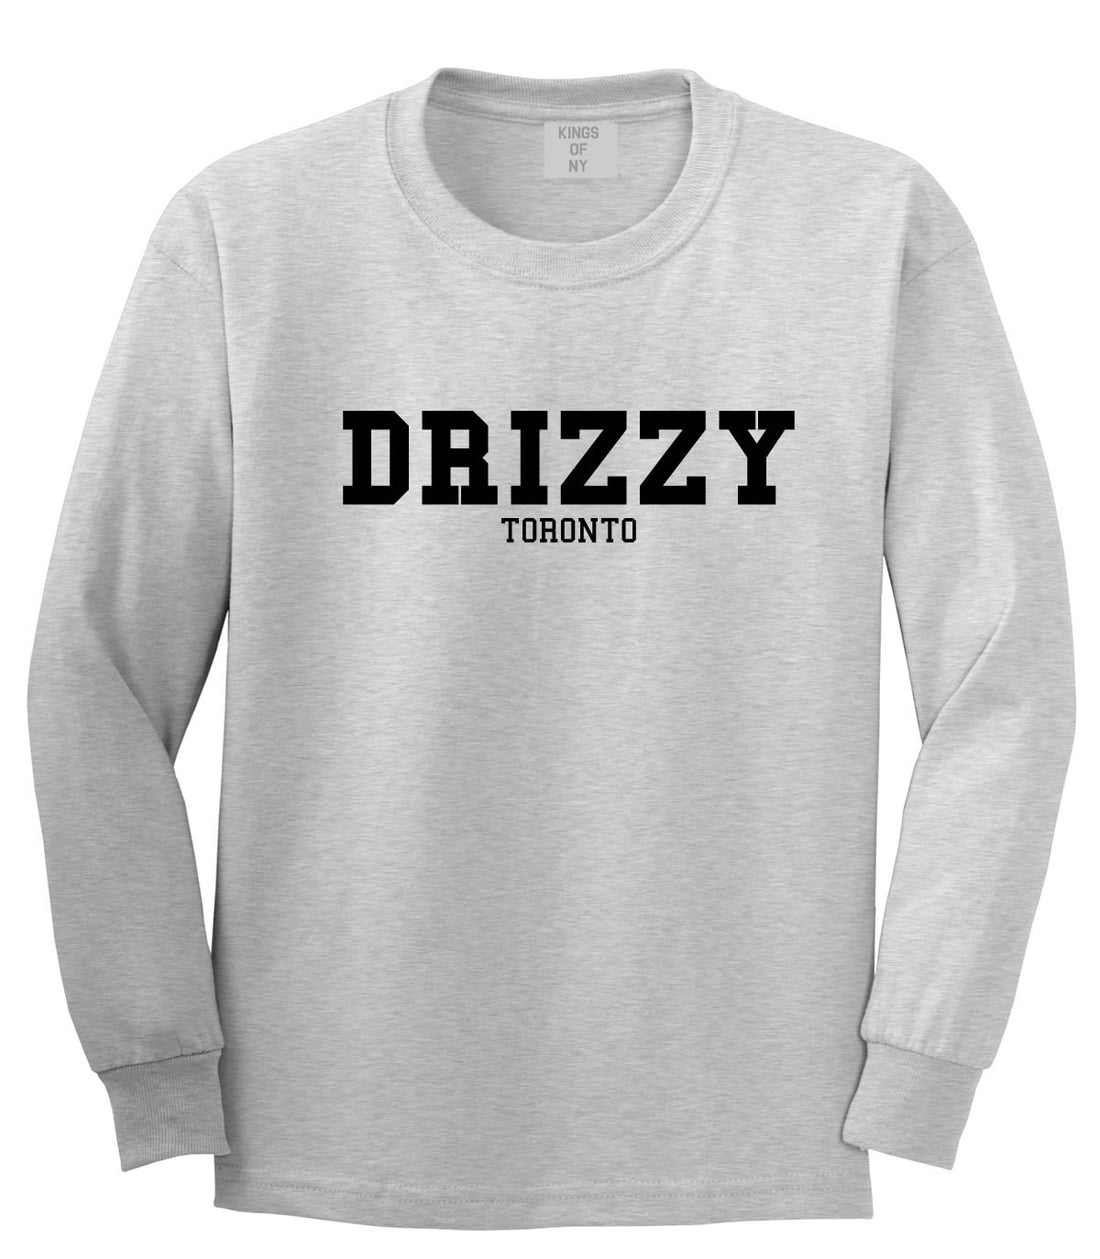 Drizzy Toronto Canada Long Sleeve T-Shirt in Grey by Kings Of NY